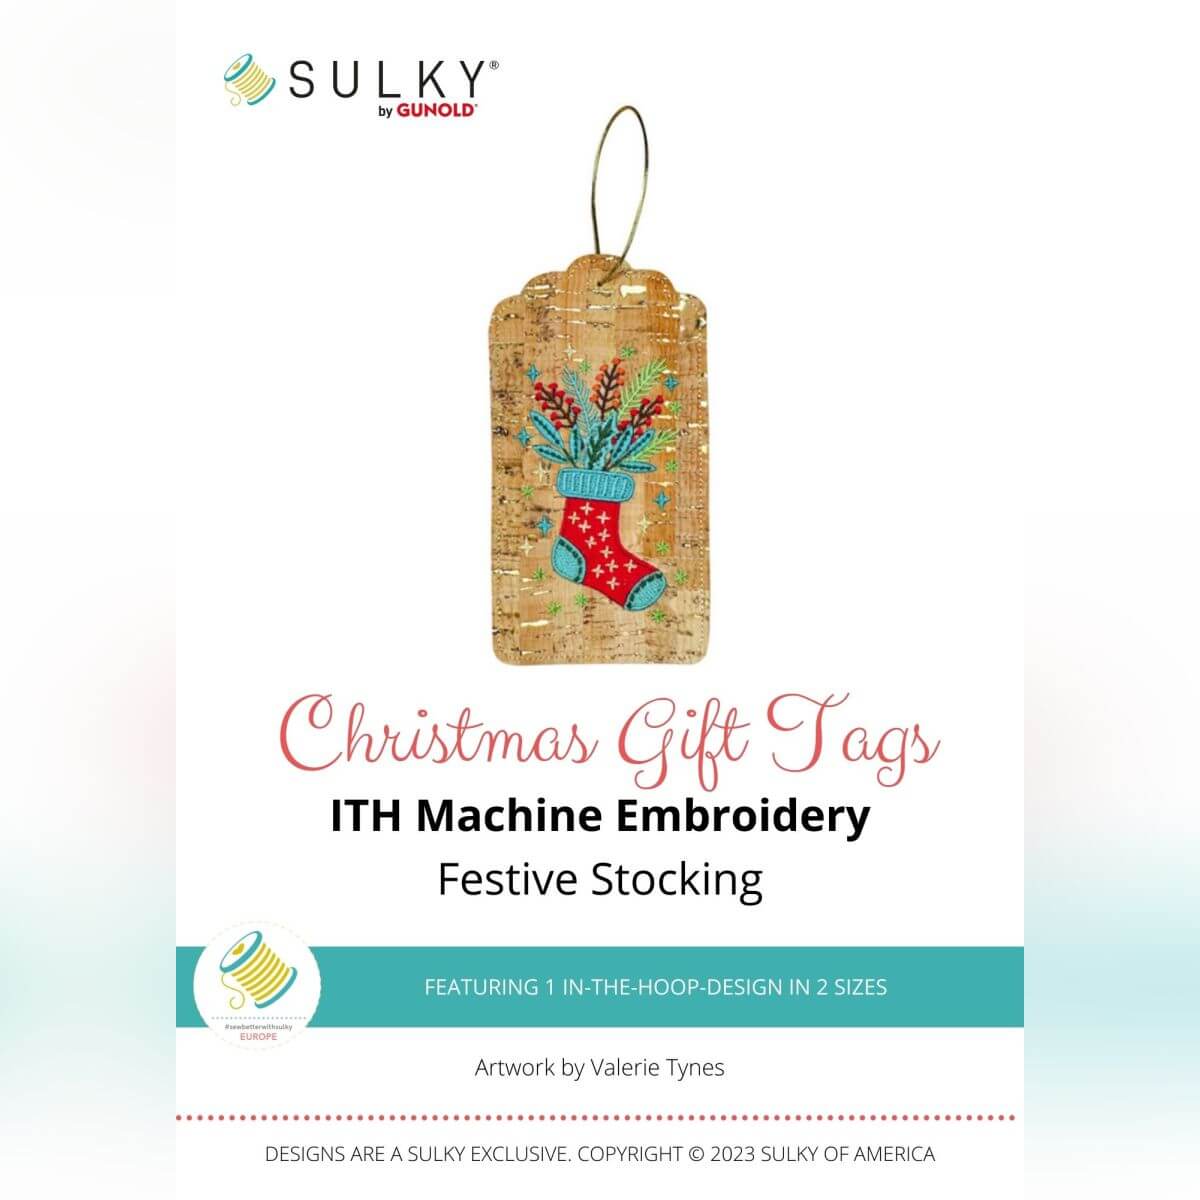 Stickdesign Christmas Gift Tags: Festive Stocking (Download)